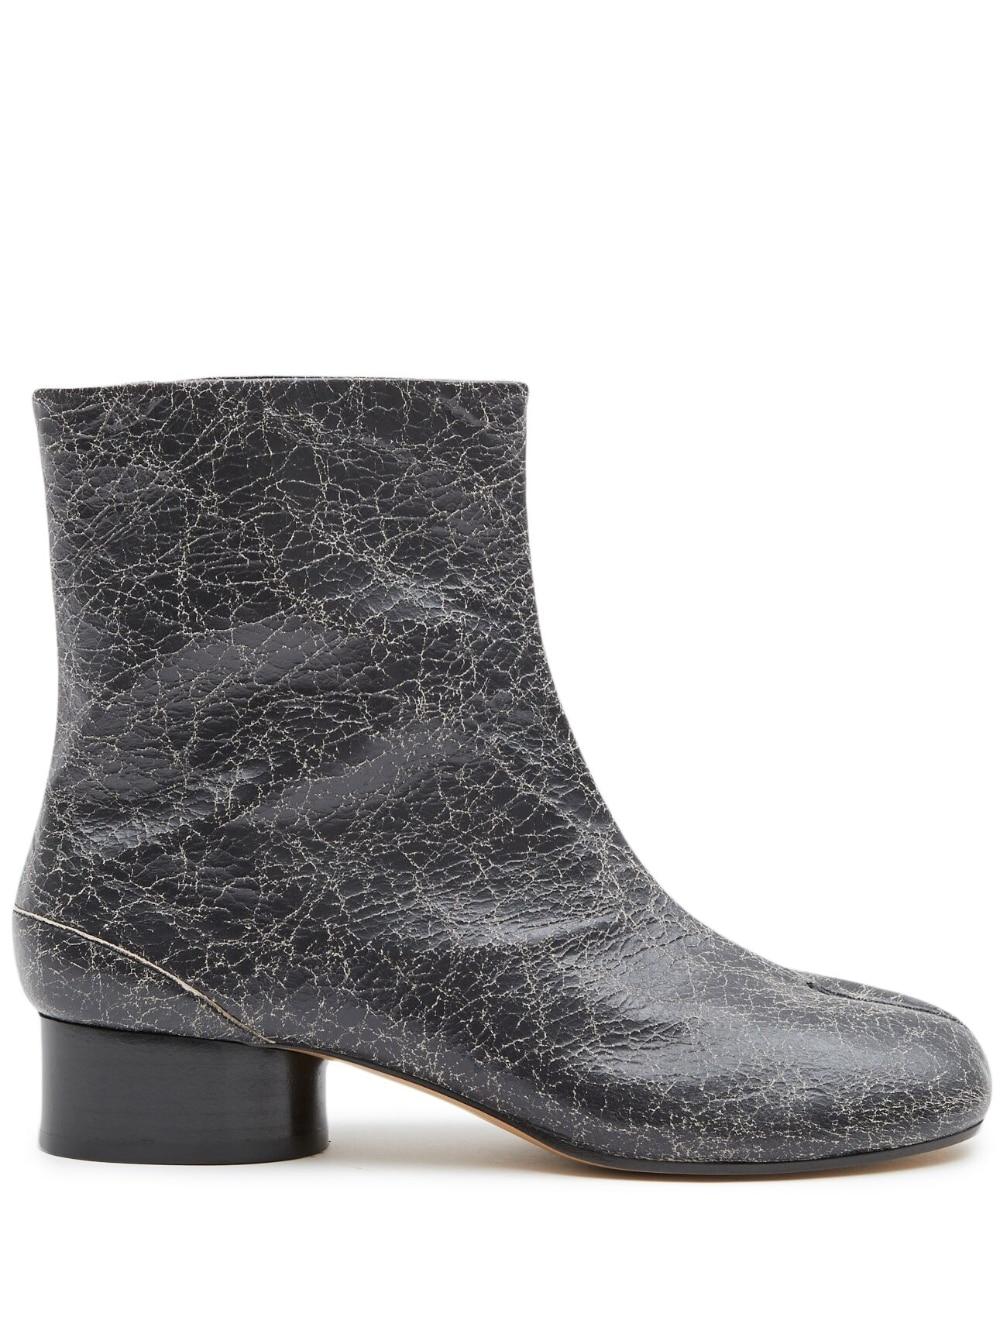 Maison Margiela Tabi Cracked-effect Boots in Gray | Lyst